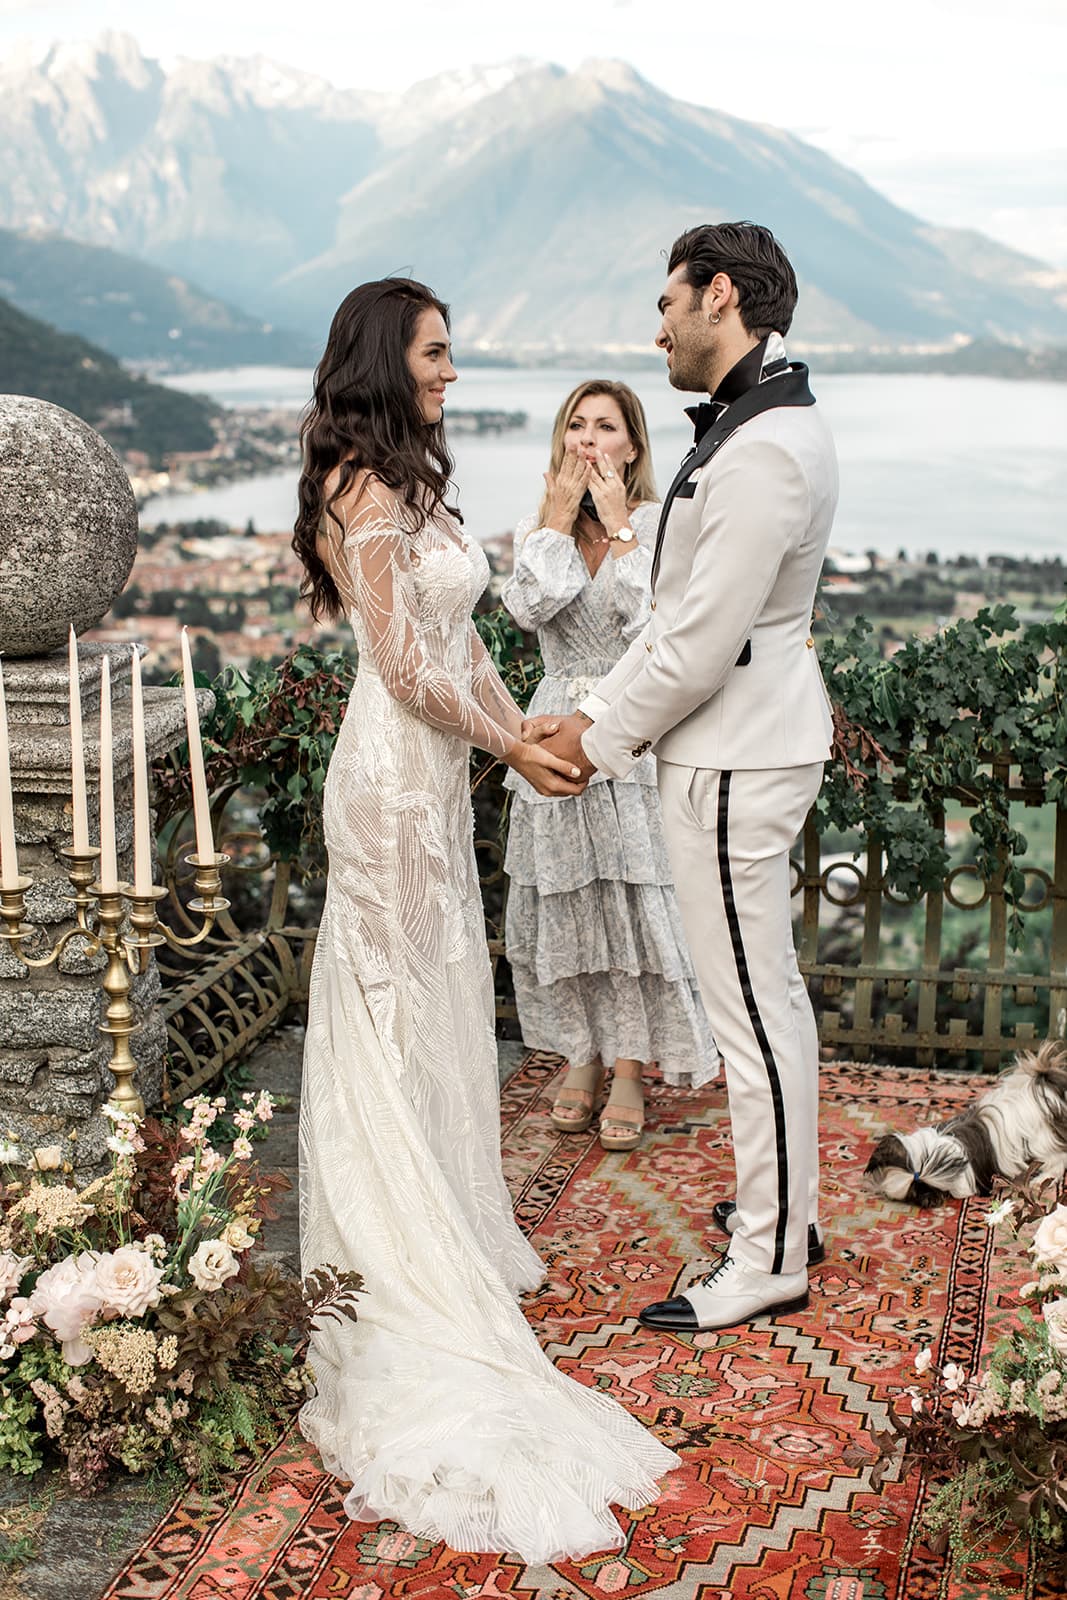 Bride and groom share vow renewal ceremony at Lake Como